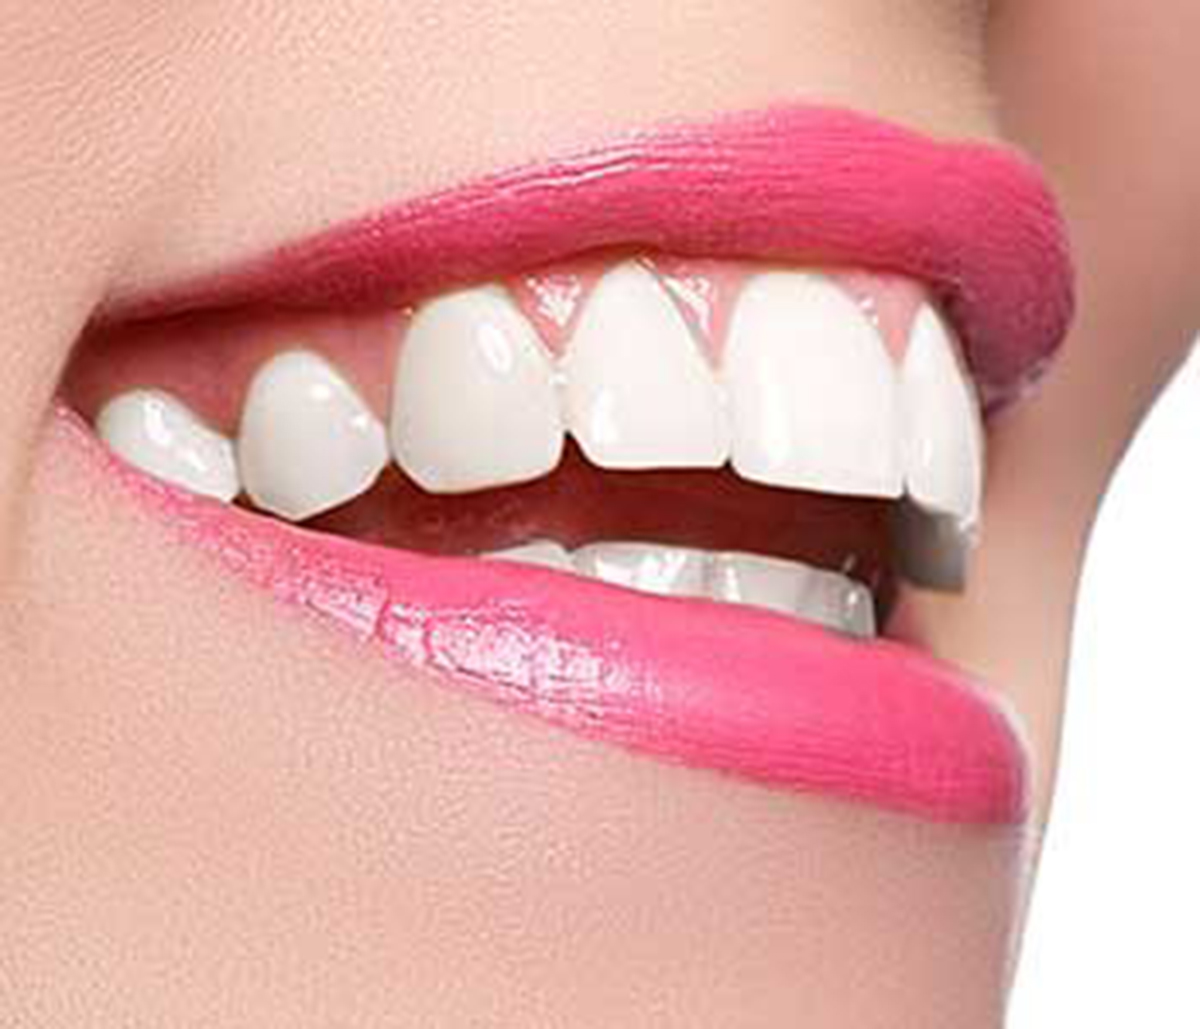 Many of those dazzling California smiles are the results of porcelain veneers